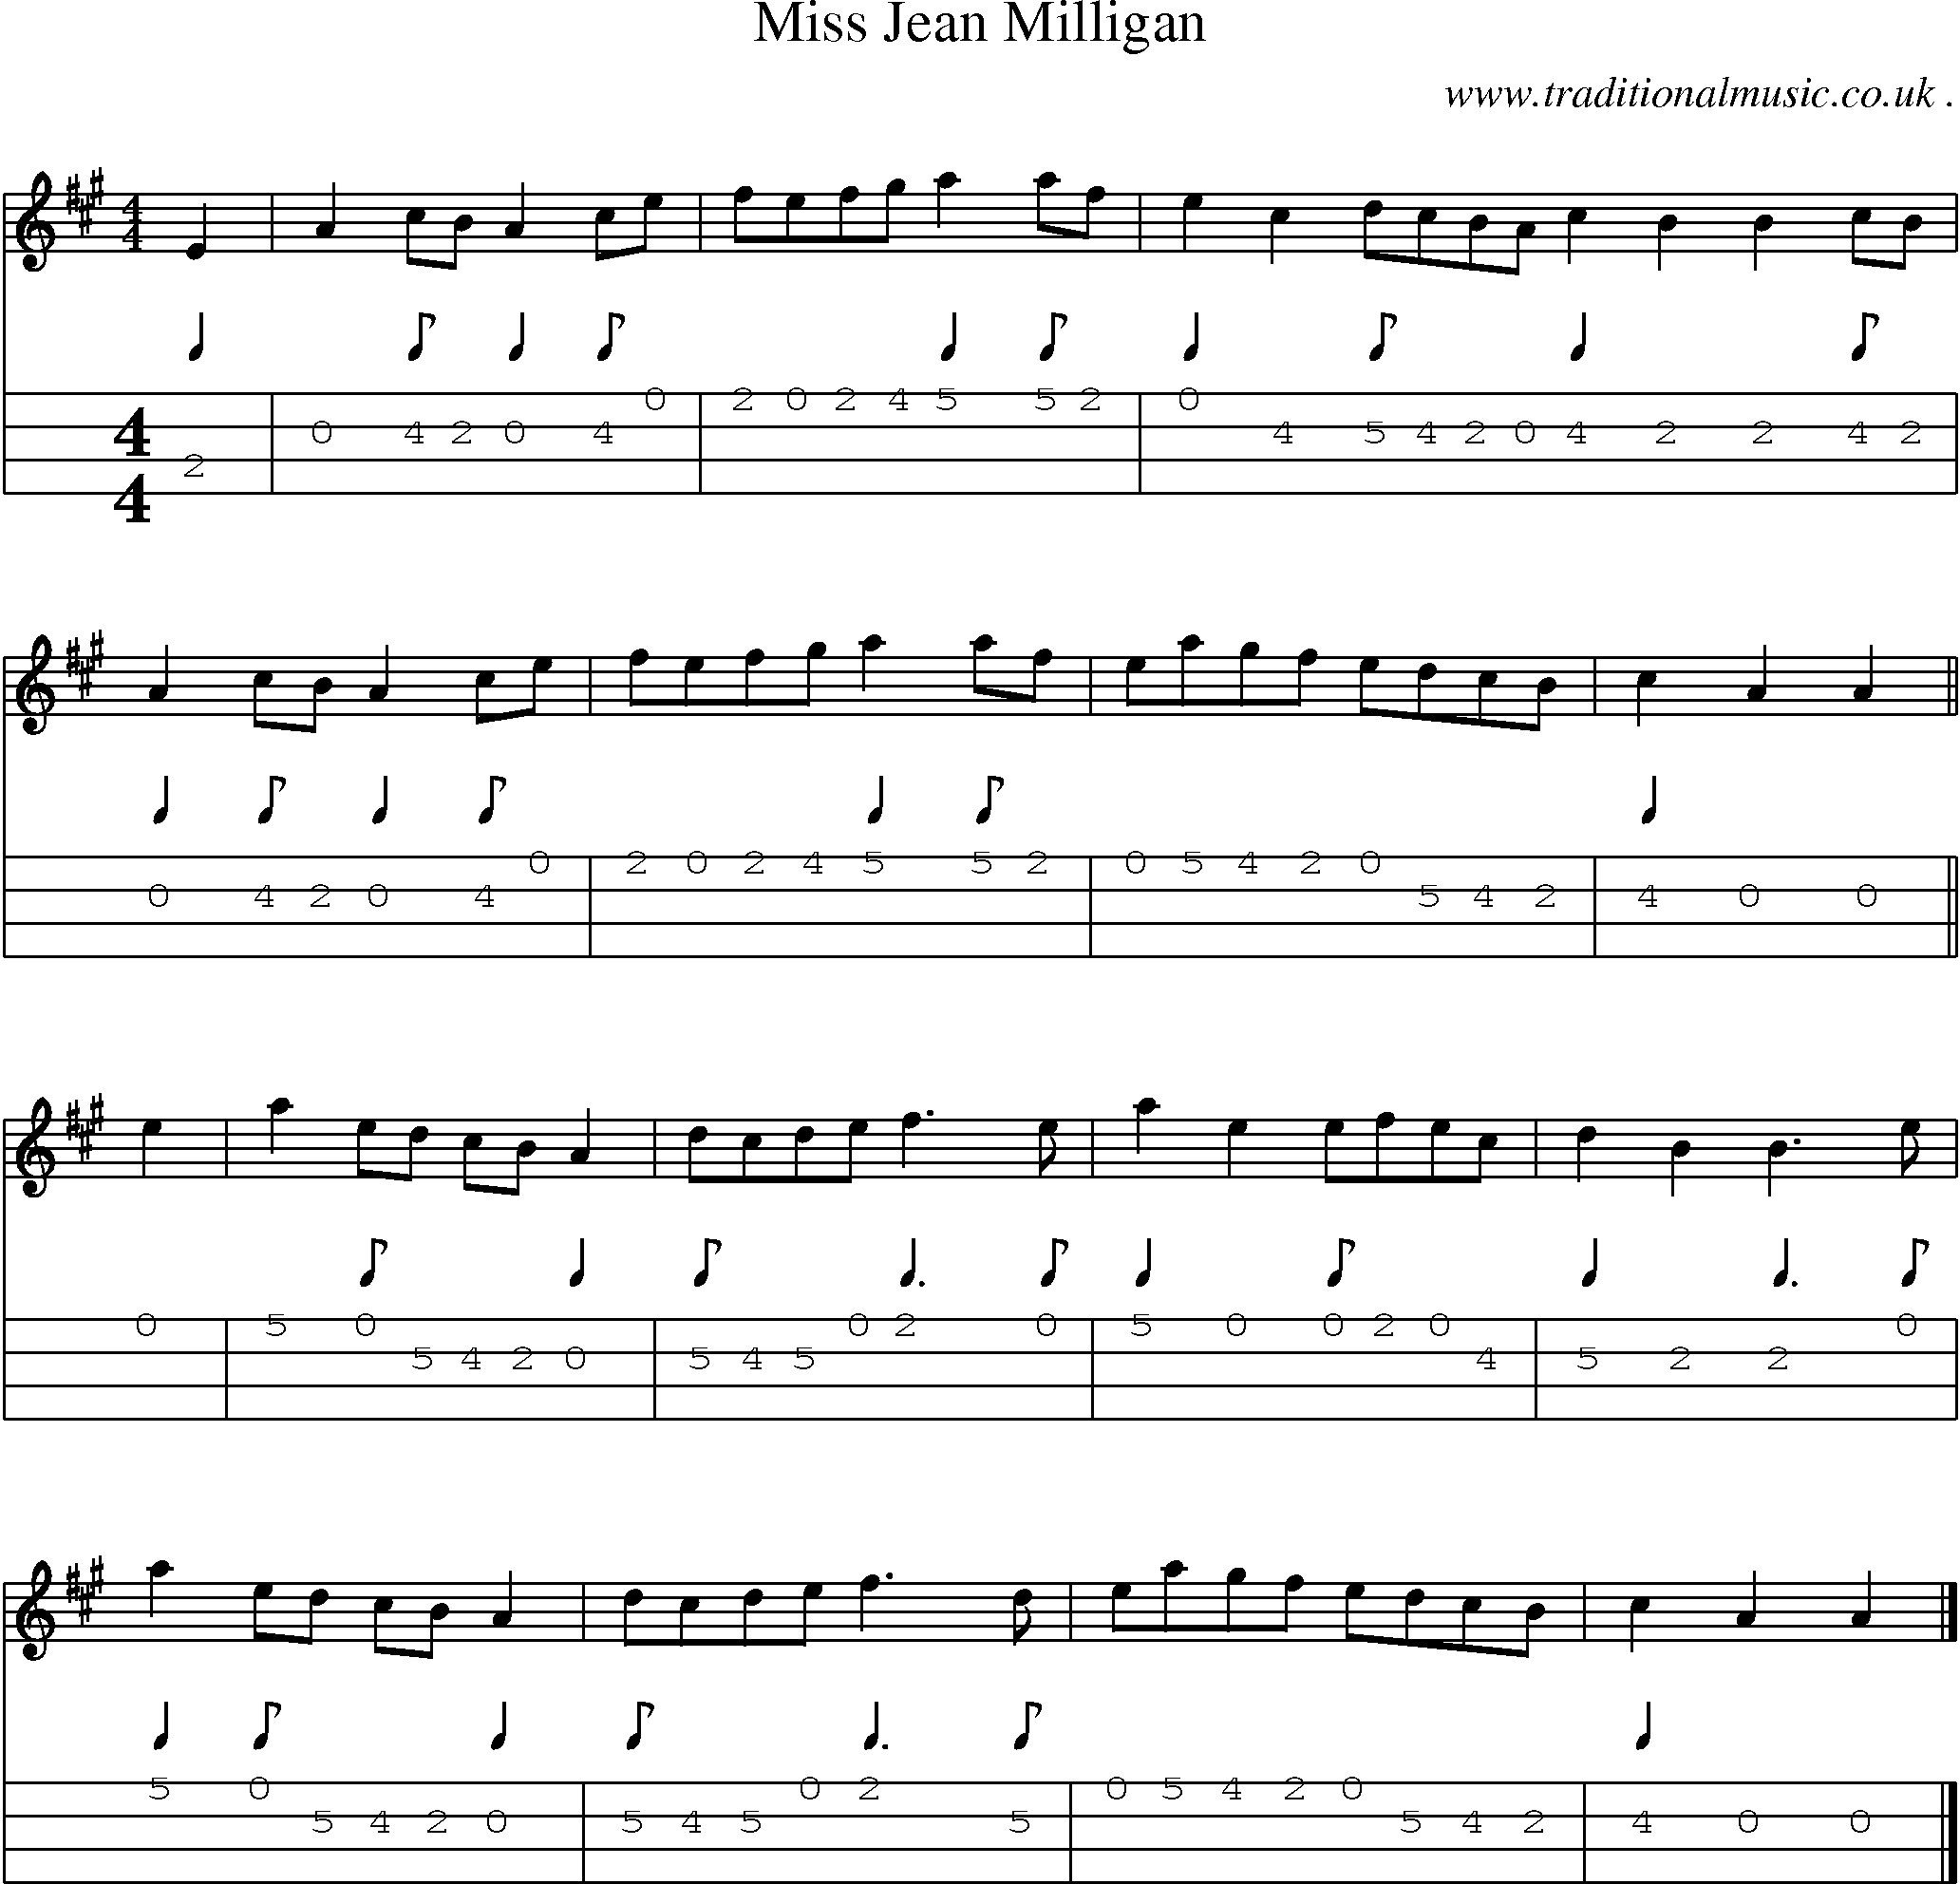 Sheet-music  score, Chords and Mandolin Tabs for Miss Jean Milligan